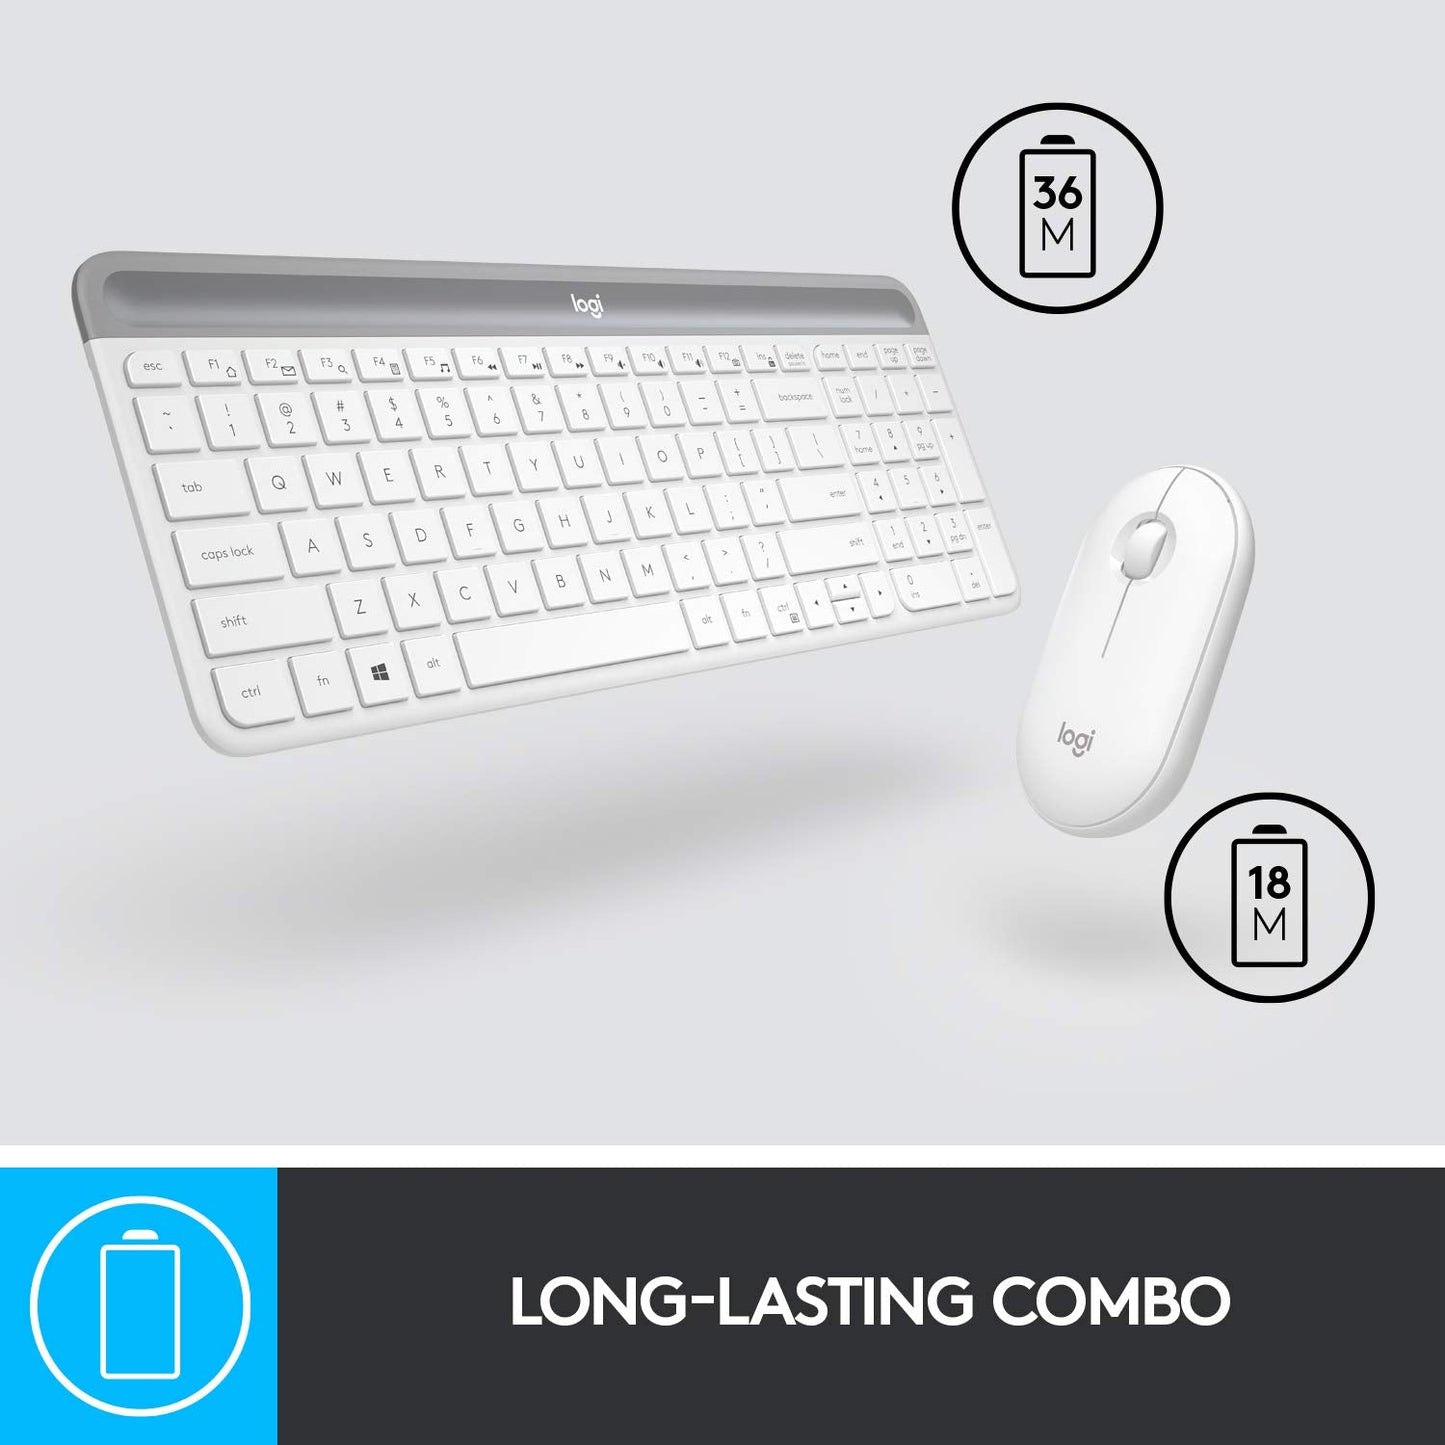 [RePacked] Logitech MK470 Wireless Keyboard and Mouse Combo - White